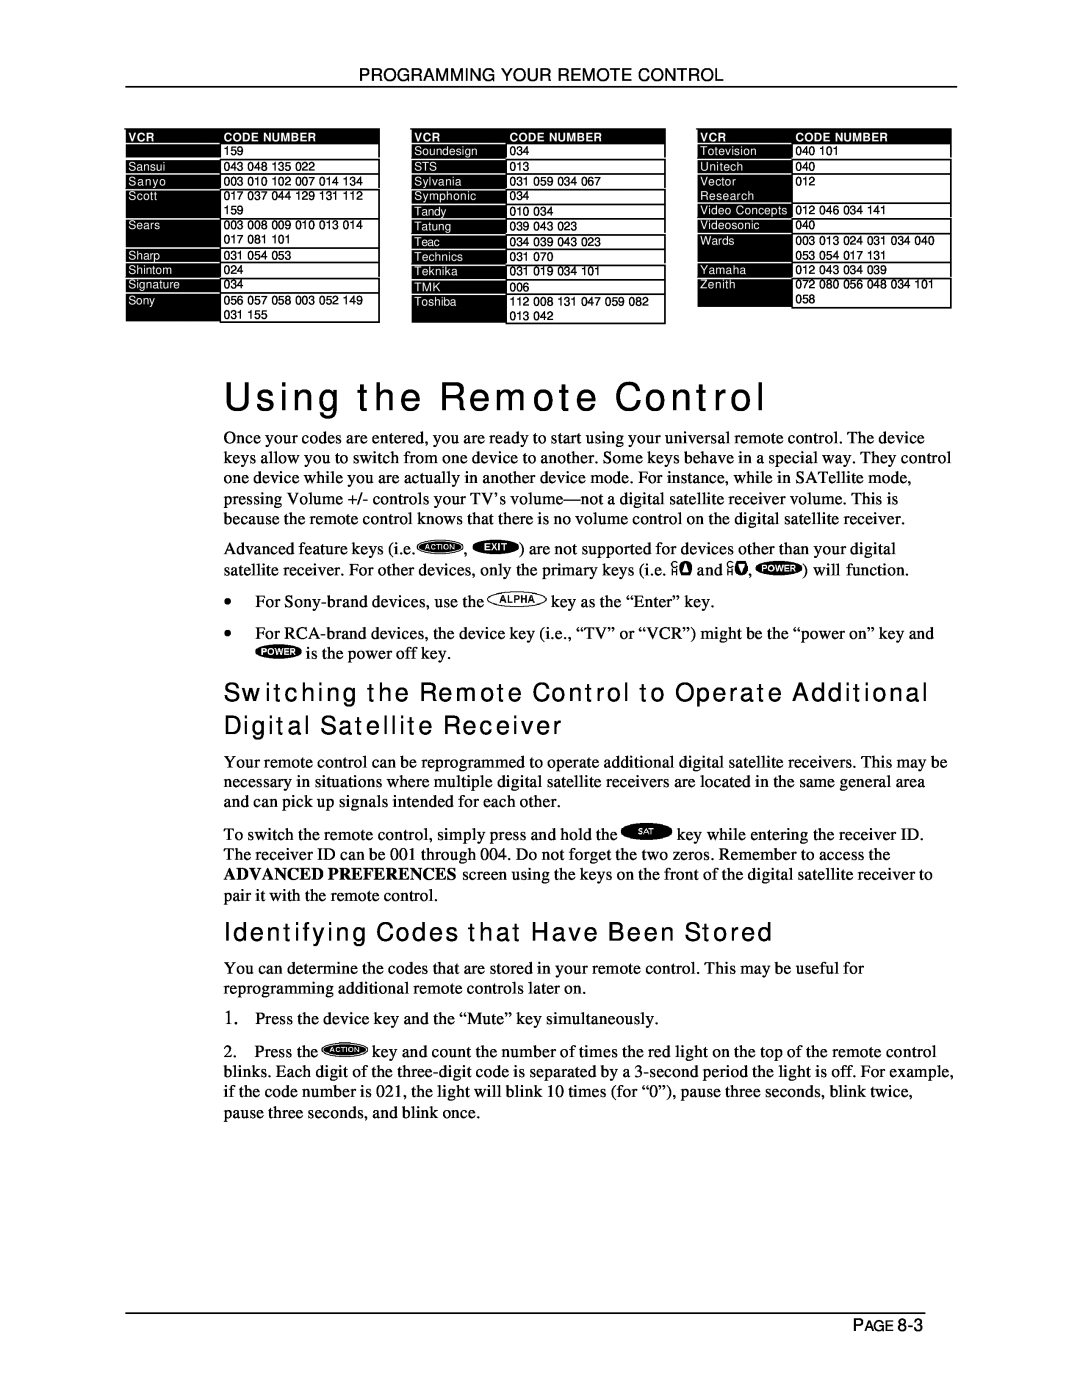 DirecTV HIRD-D11, HIRD-D01 owner manual Using the Remote Control, Identifying Codes that Have Been Stored 